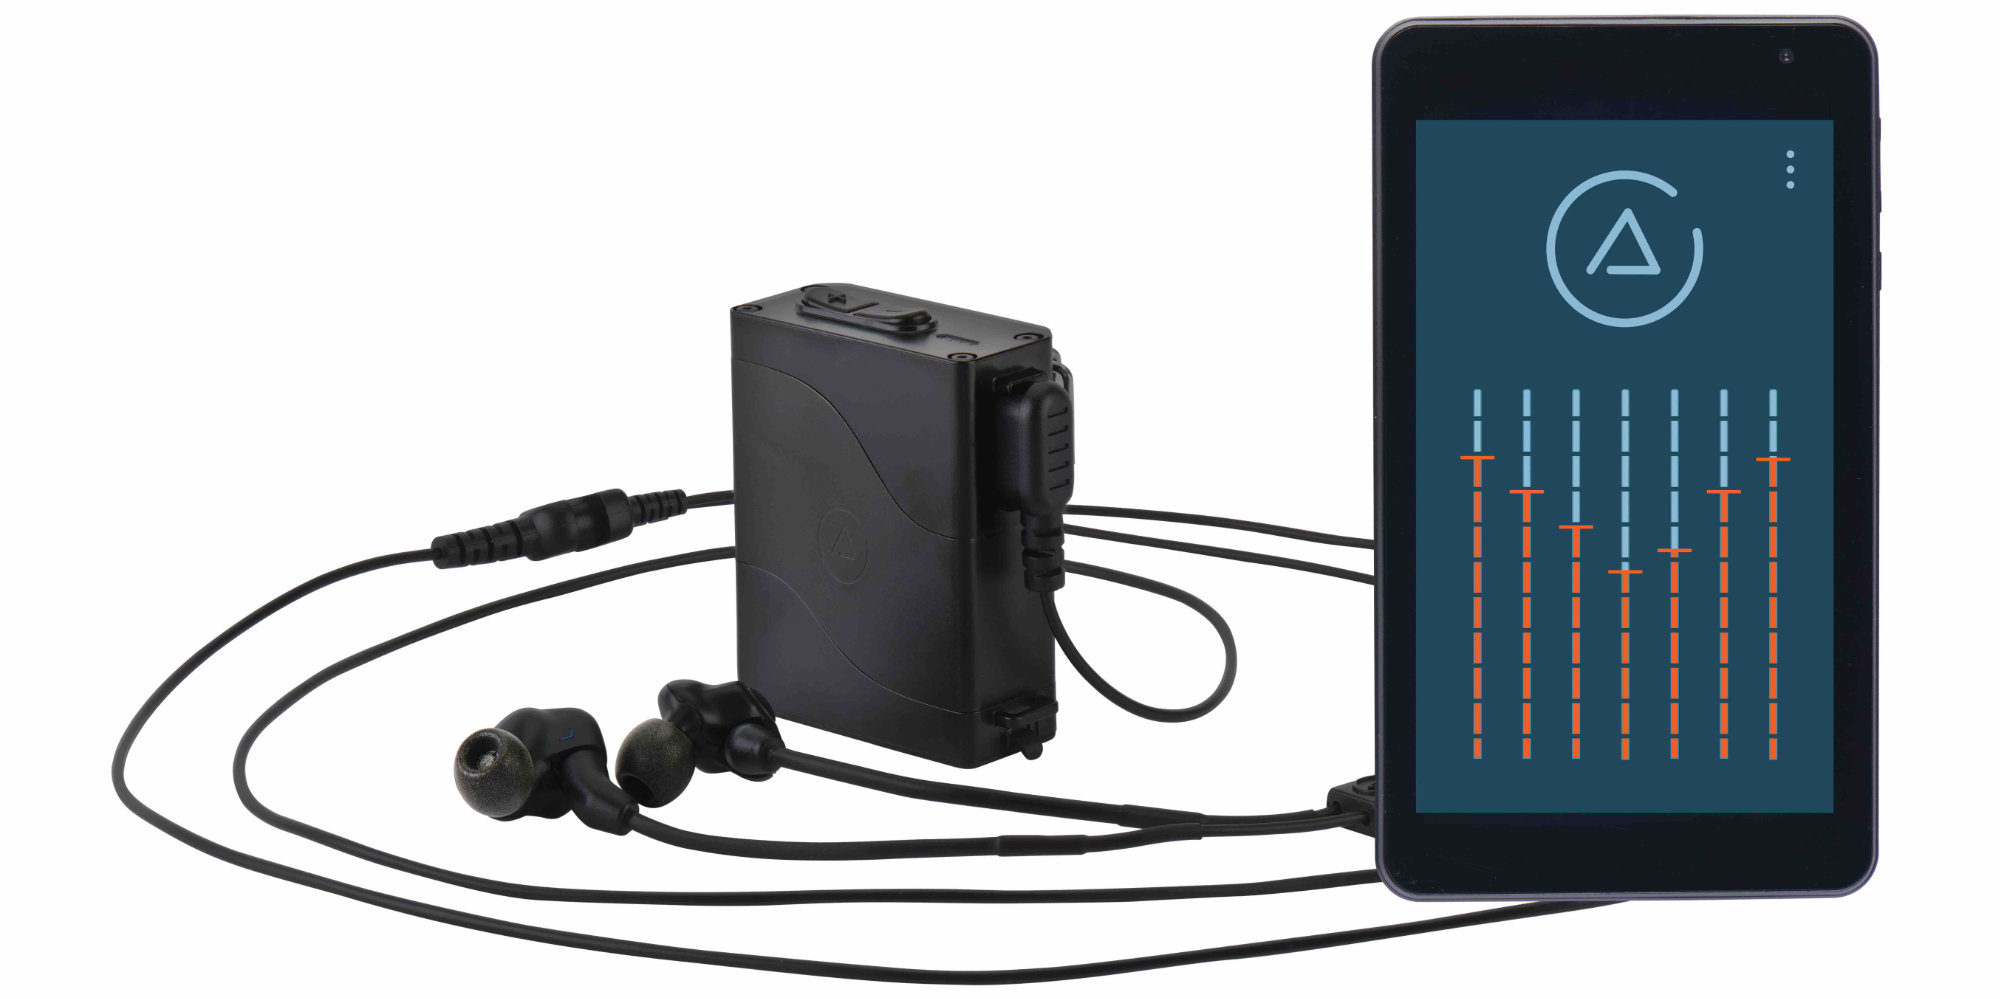 Mer information om "ASI Audio introduces iOS-compatible version of 3DME Music Enhancement IEM system"